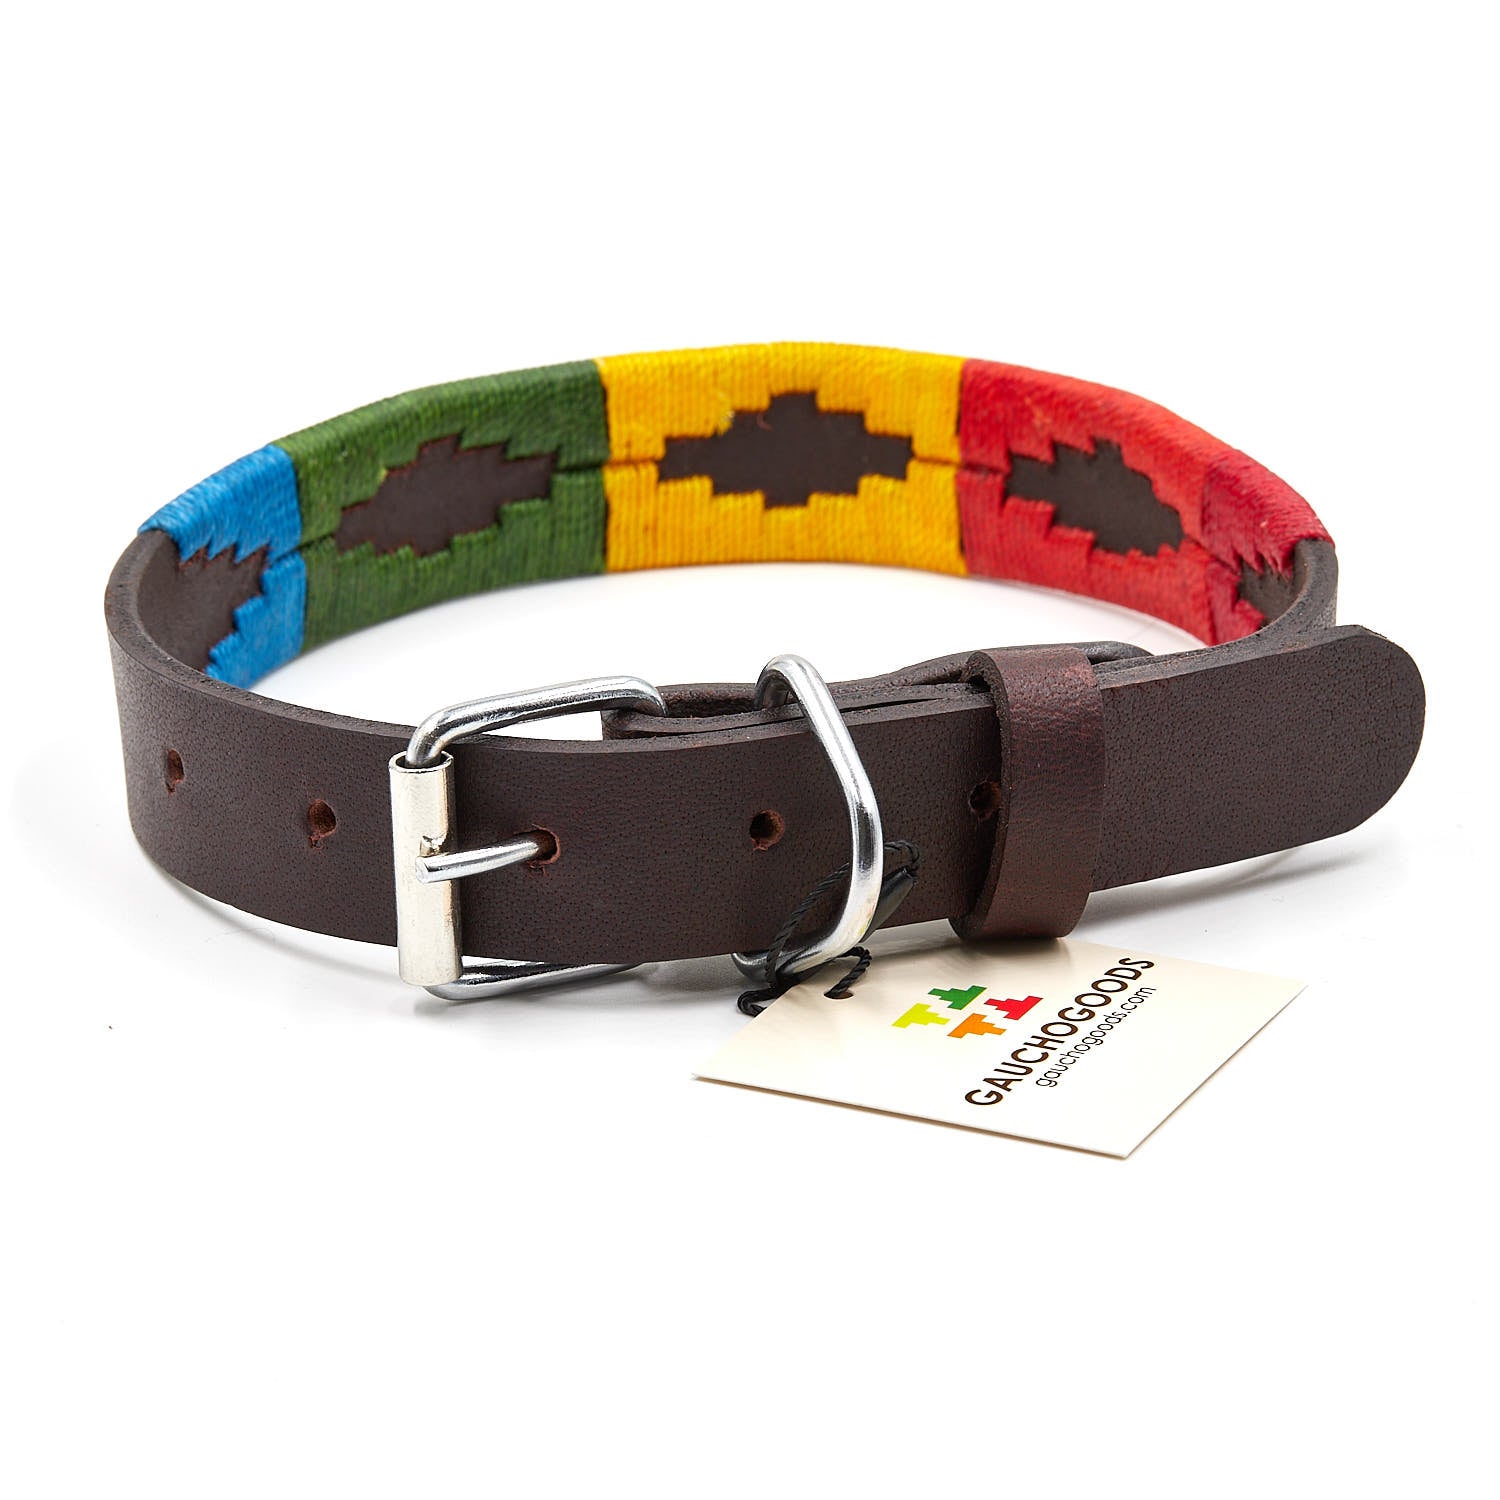 The Woodstock Leather Dog Collar - hand-stitched with the distinctive Orange, Red, Yellow, Green and Blue